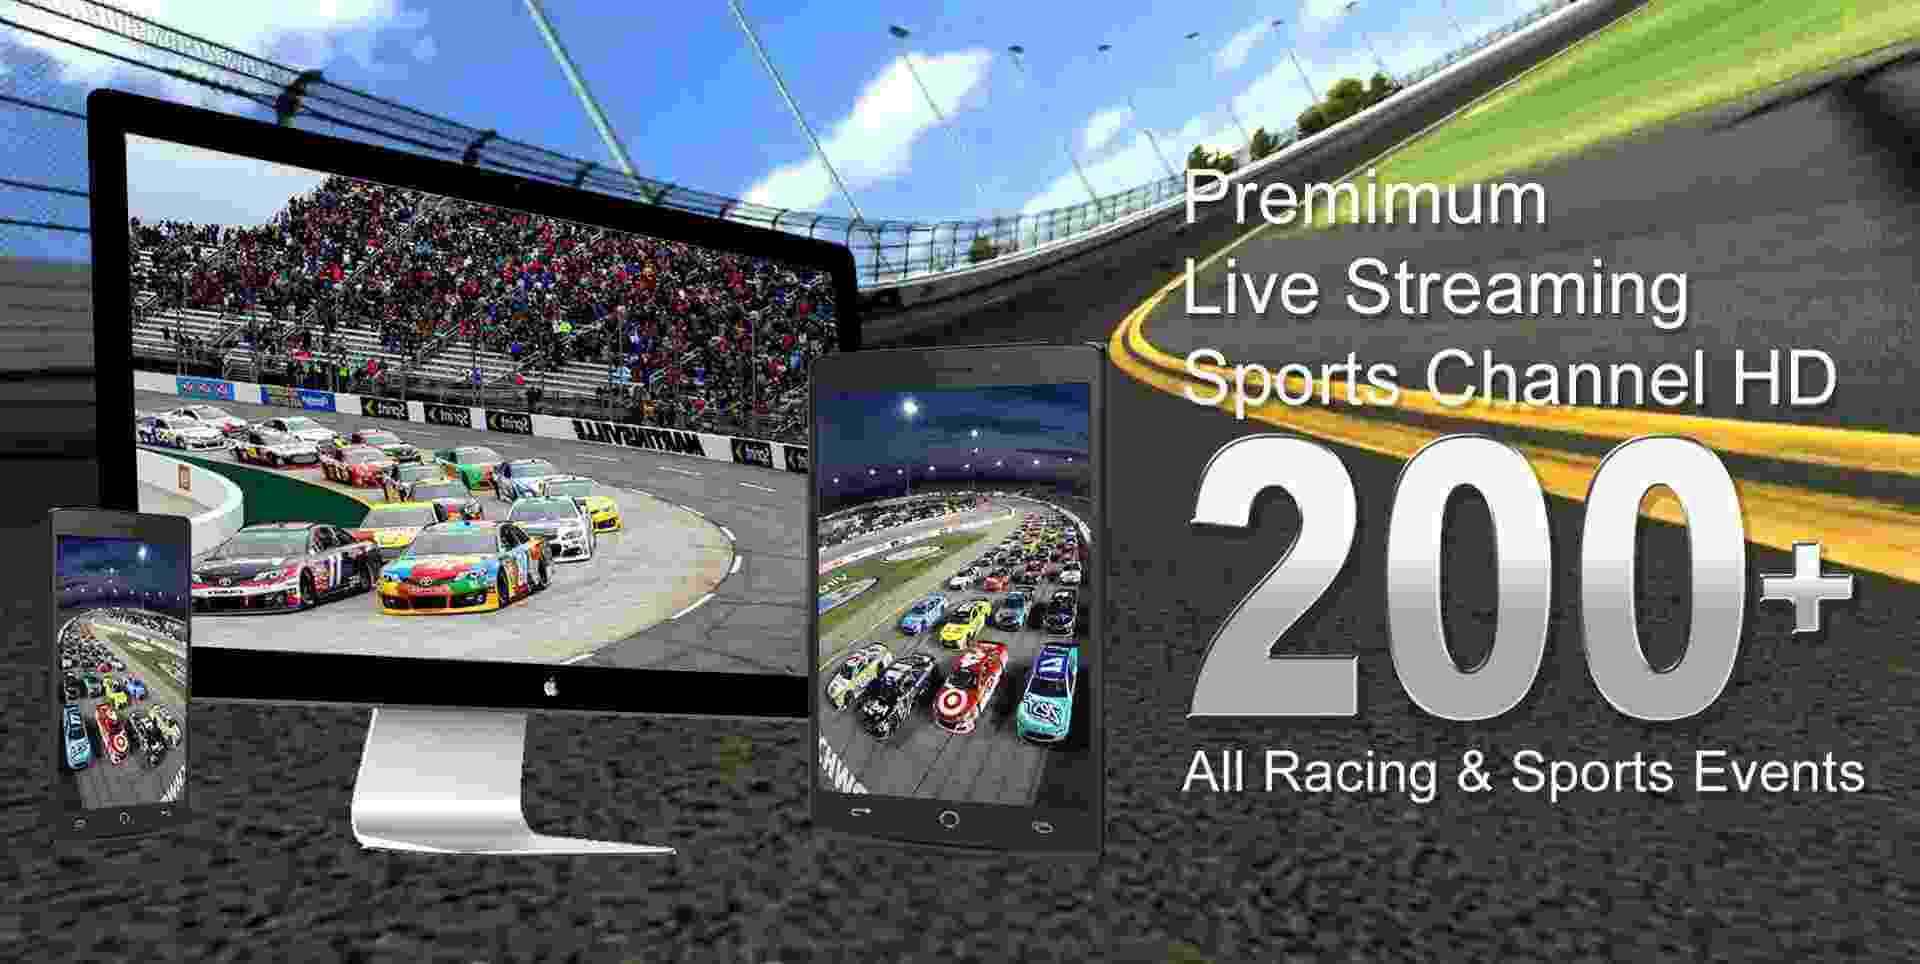 nascar-race-2015-at-chicagoland-speedway-live